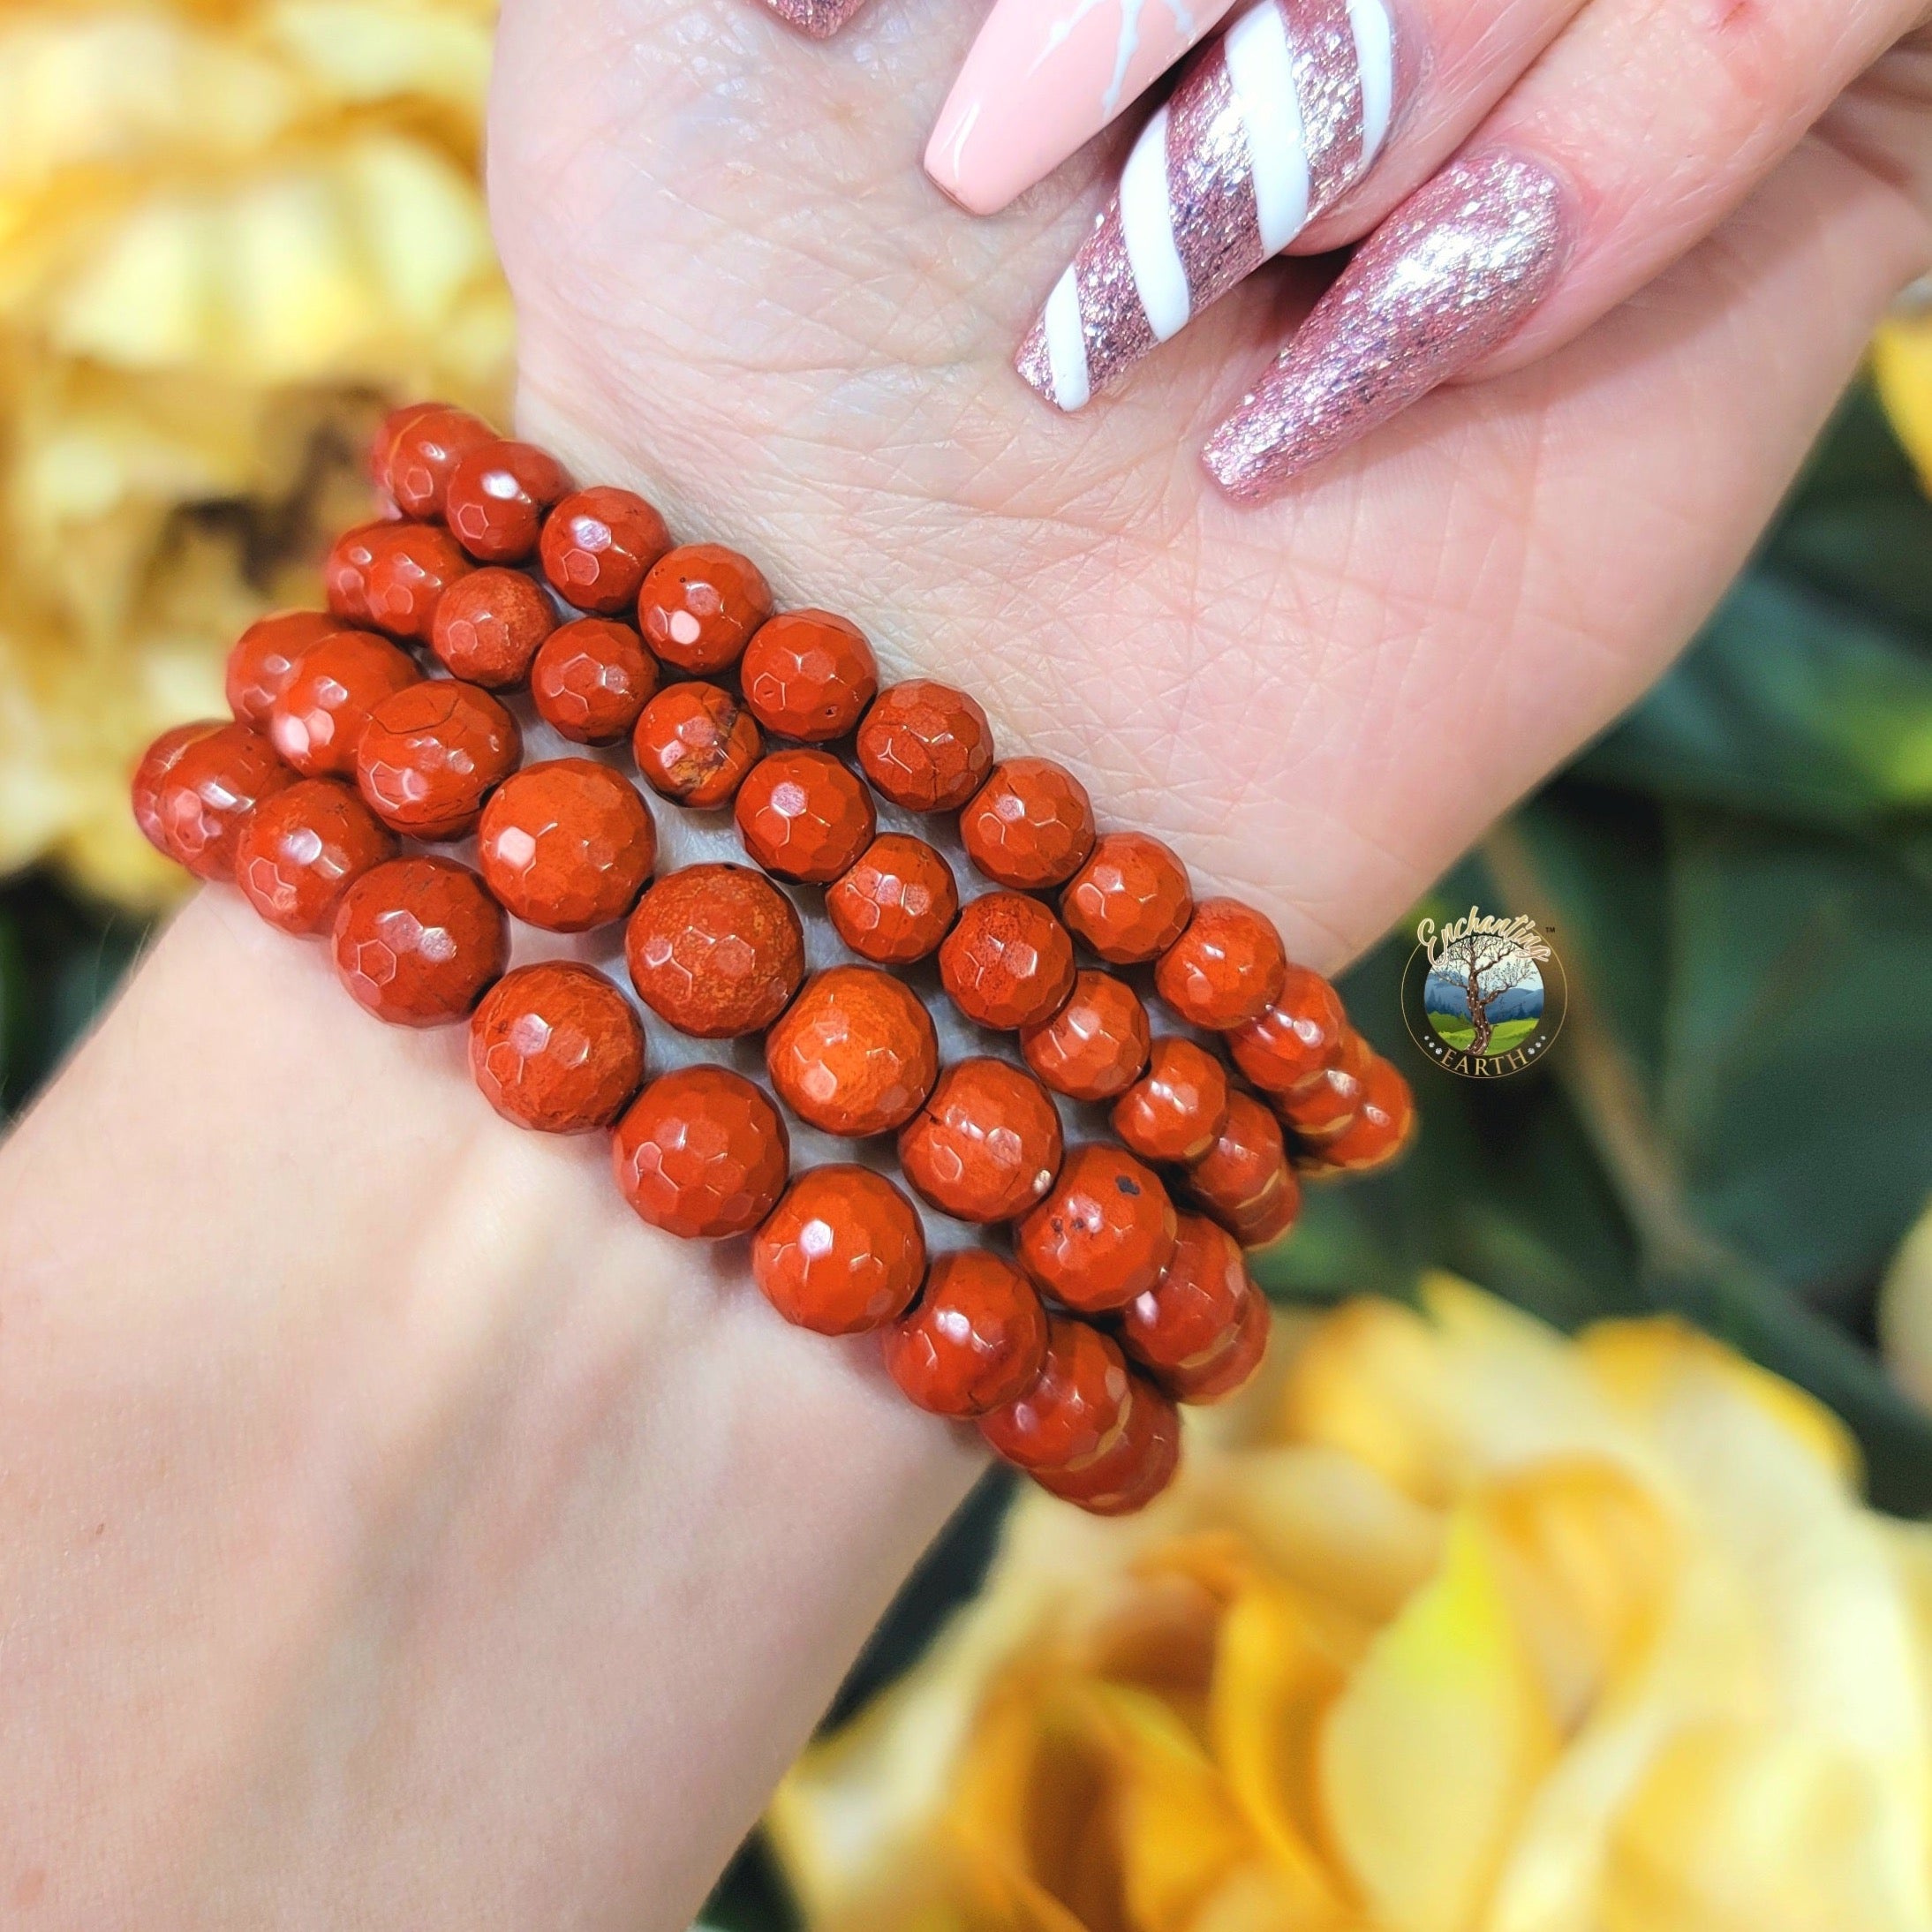 Red Jasper Faceted Bracelet for Good Health, Strength and Physical Vitality